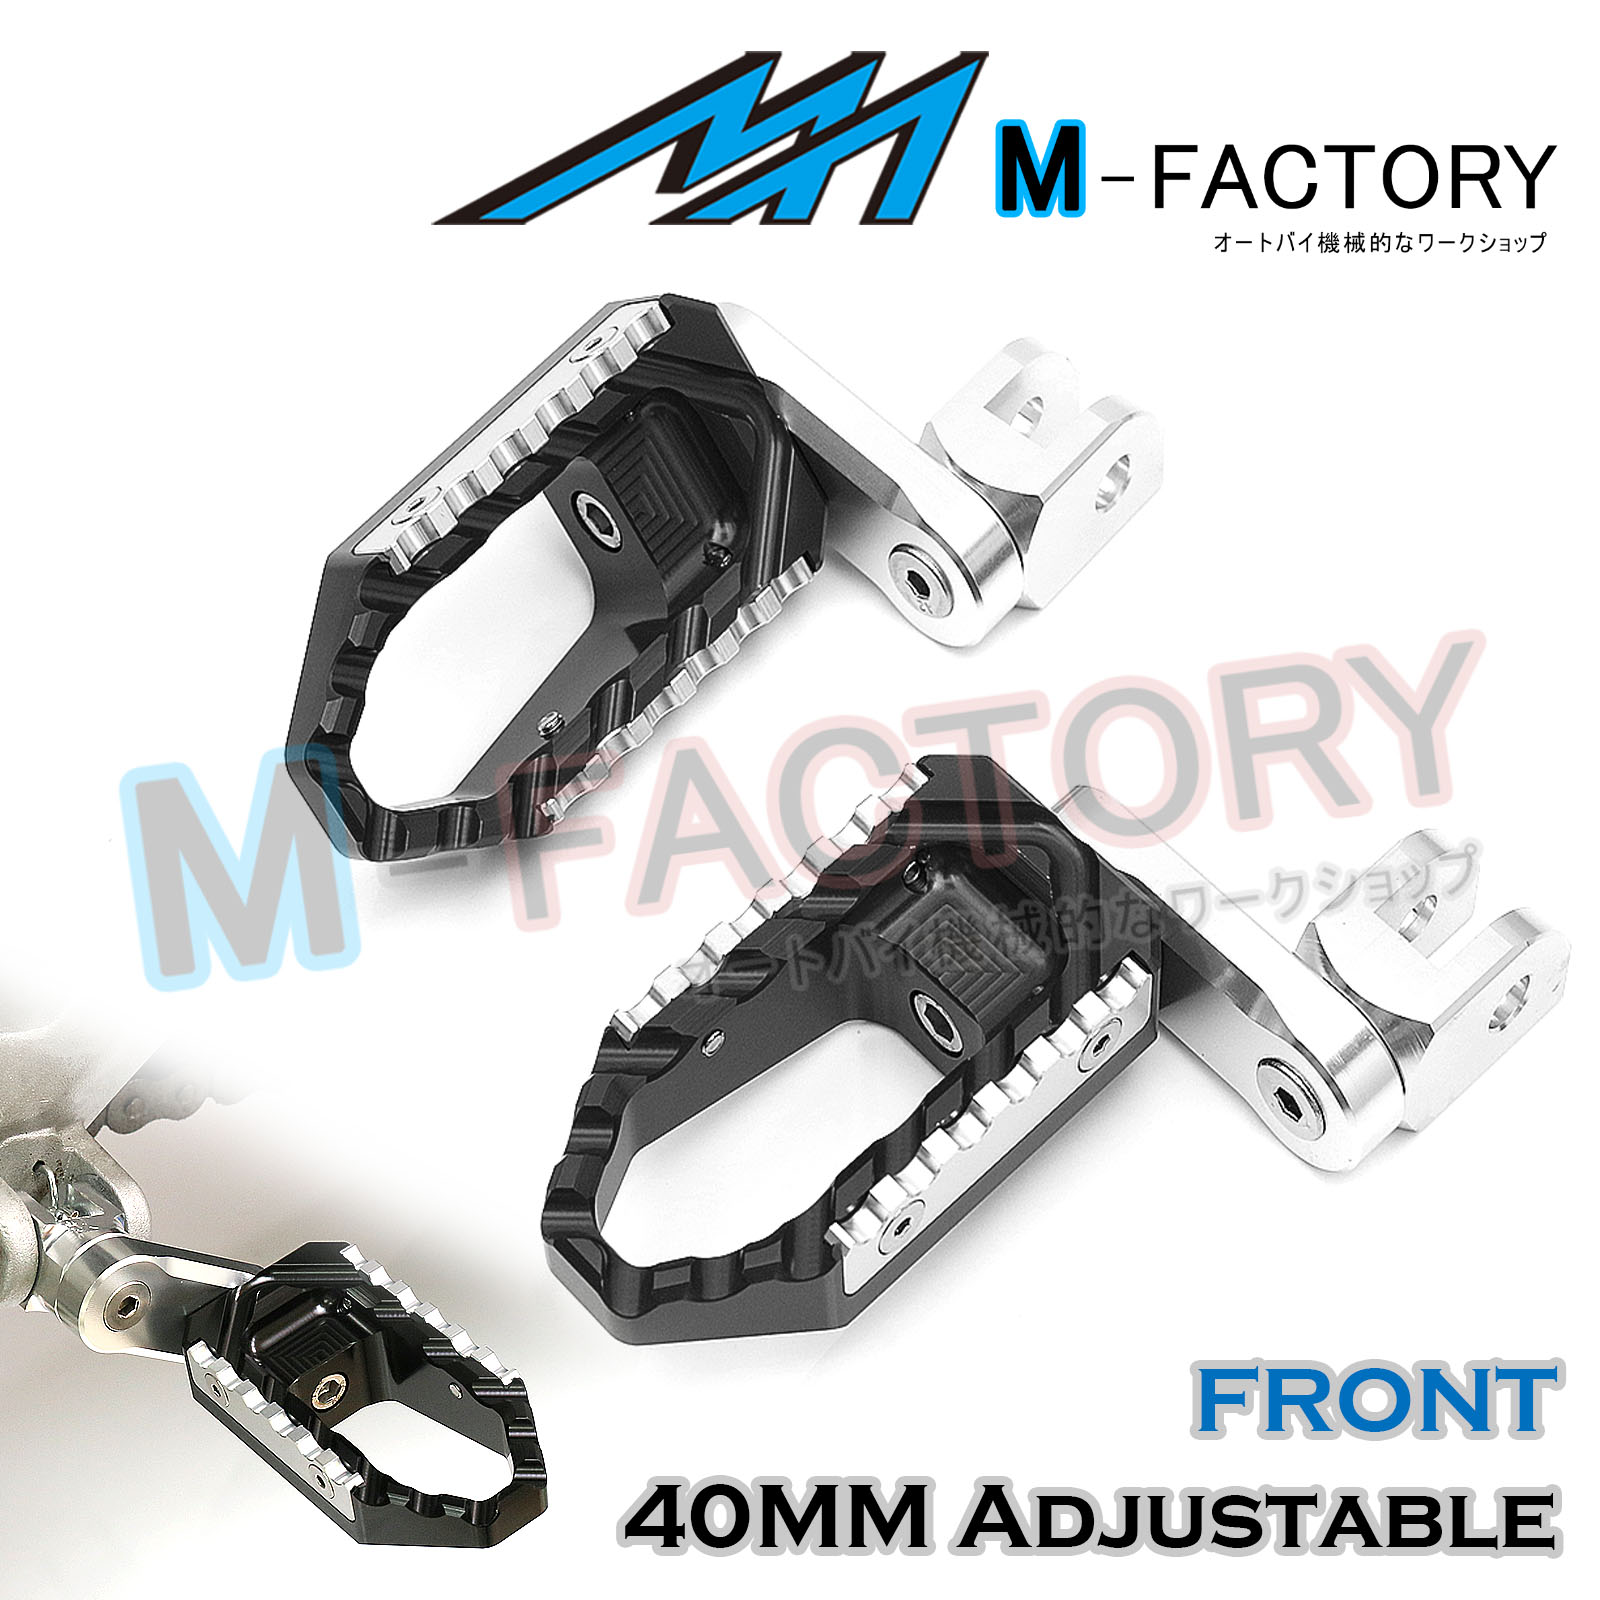 Fit Honda Z125M Monkey 40mm Adjustable Front Rider Cruise Foot Pegs